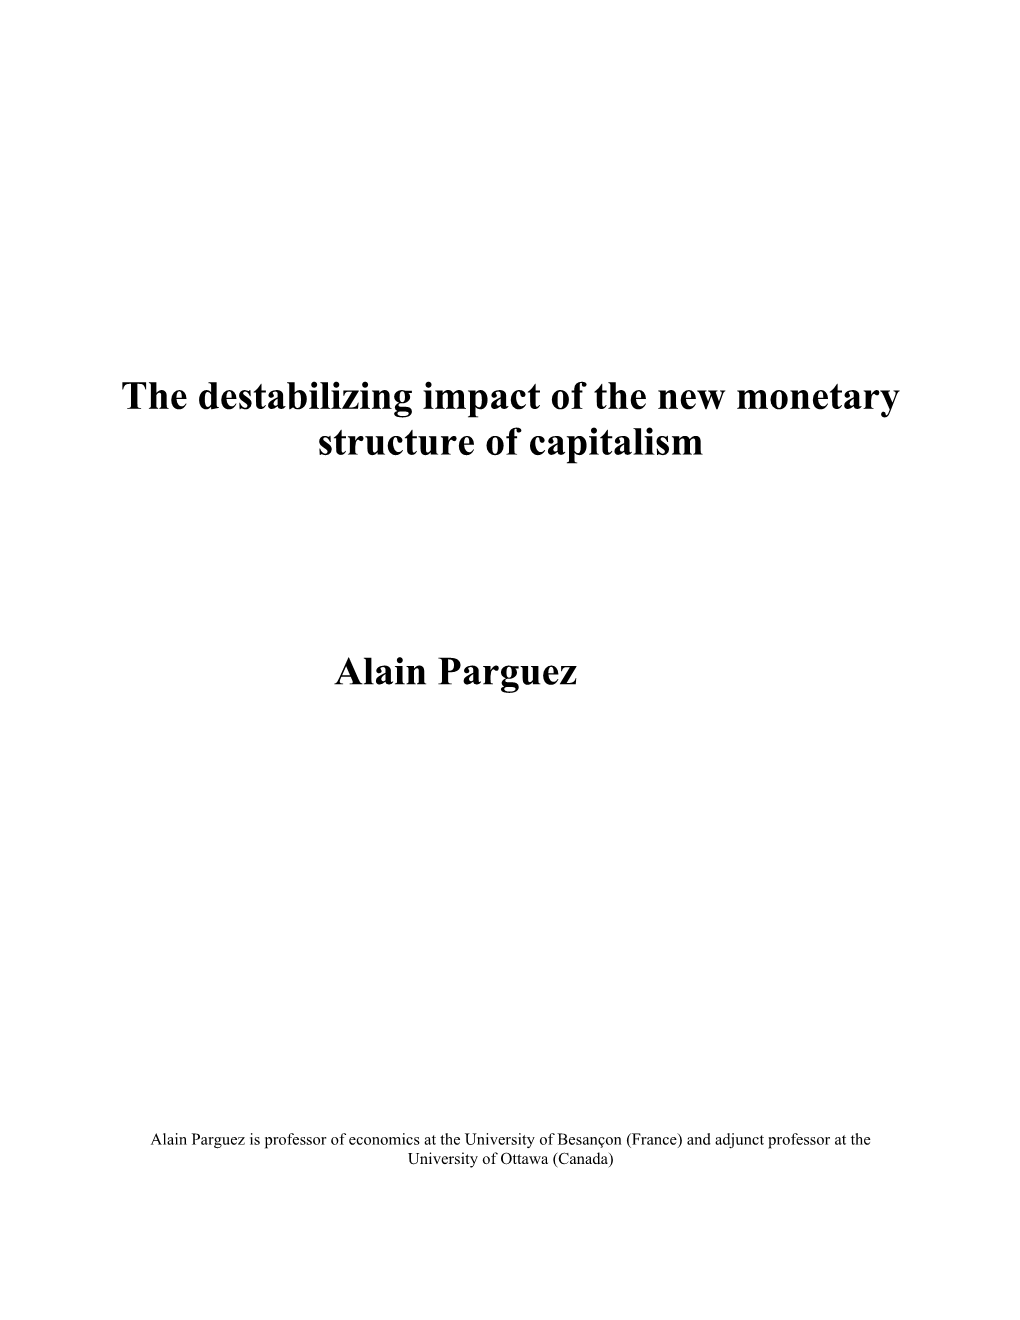 The Destabilizing Impact of the New Monetary Structure of Capitalism